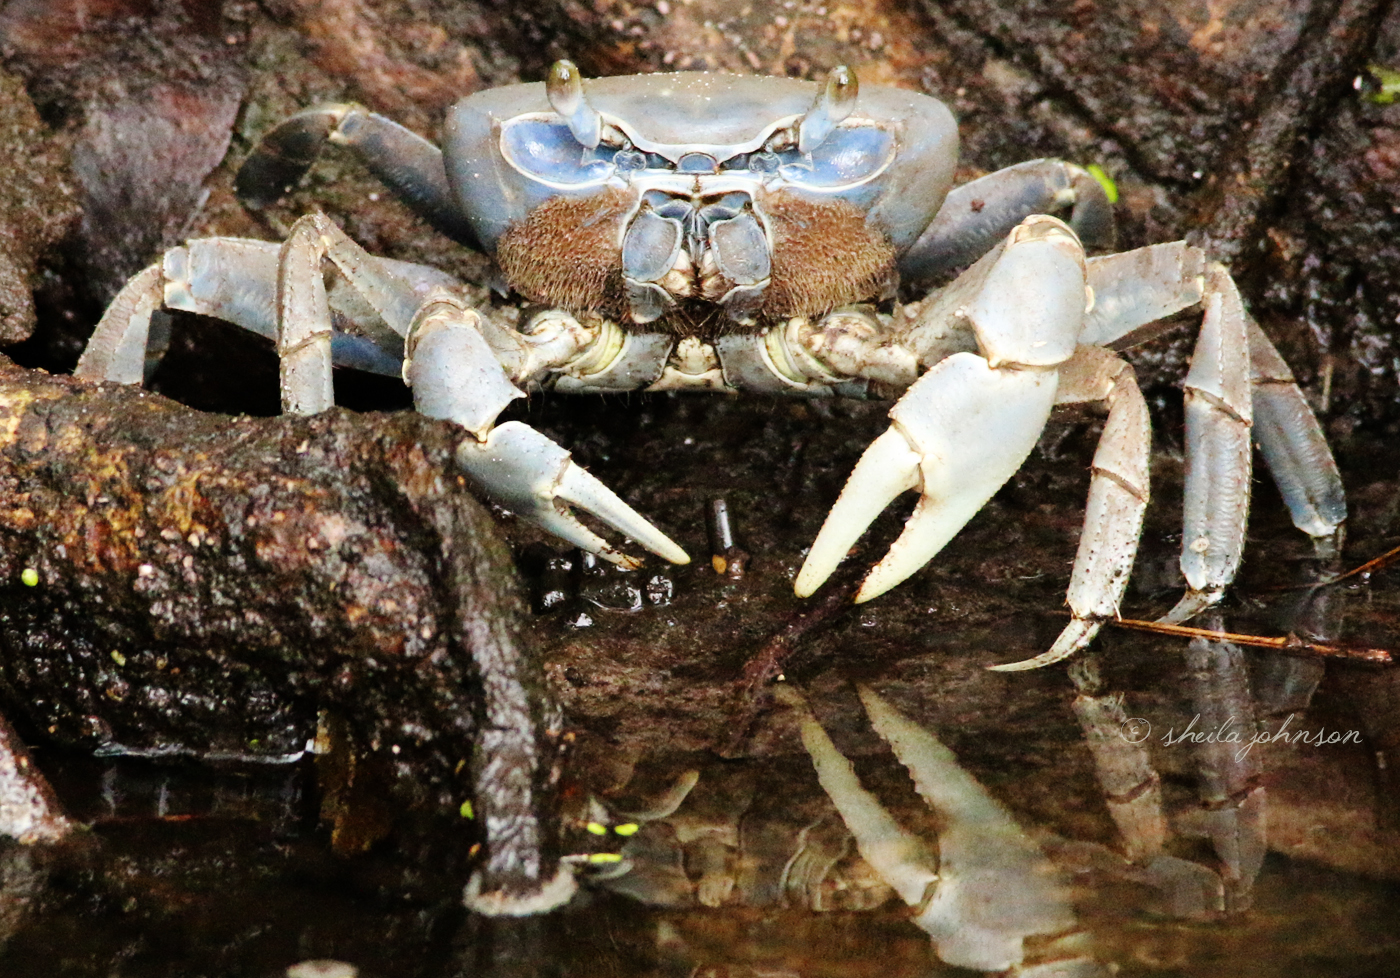 This Blue Crab Appears To Be Sitting On His Own Personal Throne. Sitting Apart From The Other Crabs, Perhaps He Is. That Faux Fu Manchu Sorta Completes The Look!